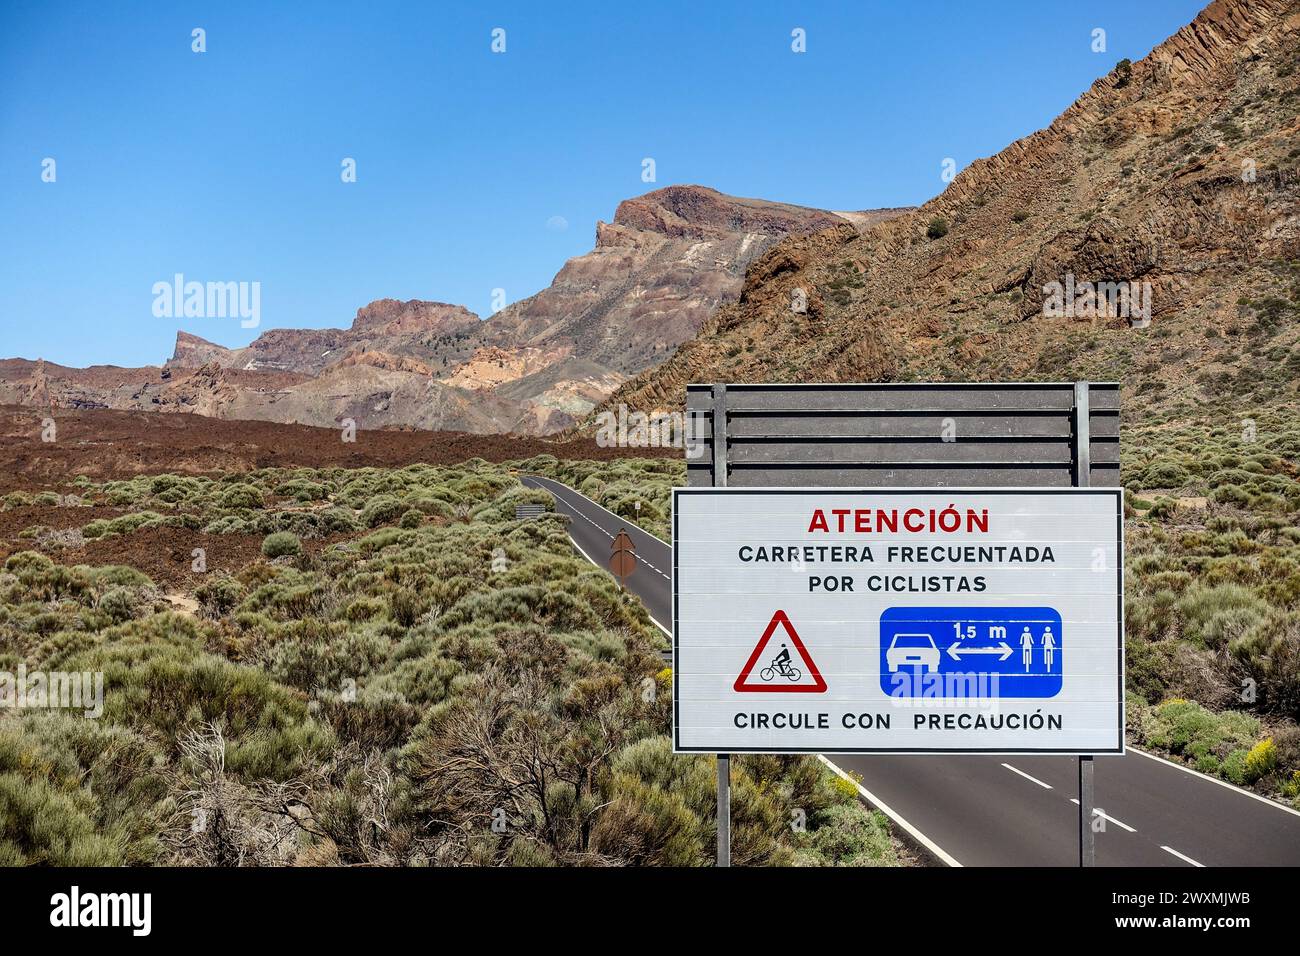 Cyclist warning road sign in Spanish with Tenerife mountain landscape in the background under clear blue sky Stock Photo